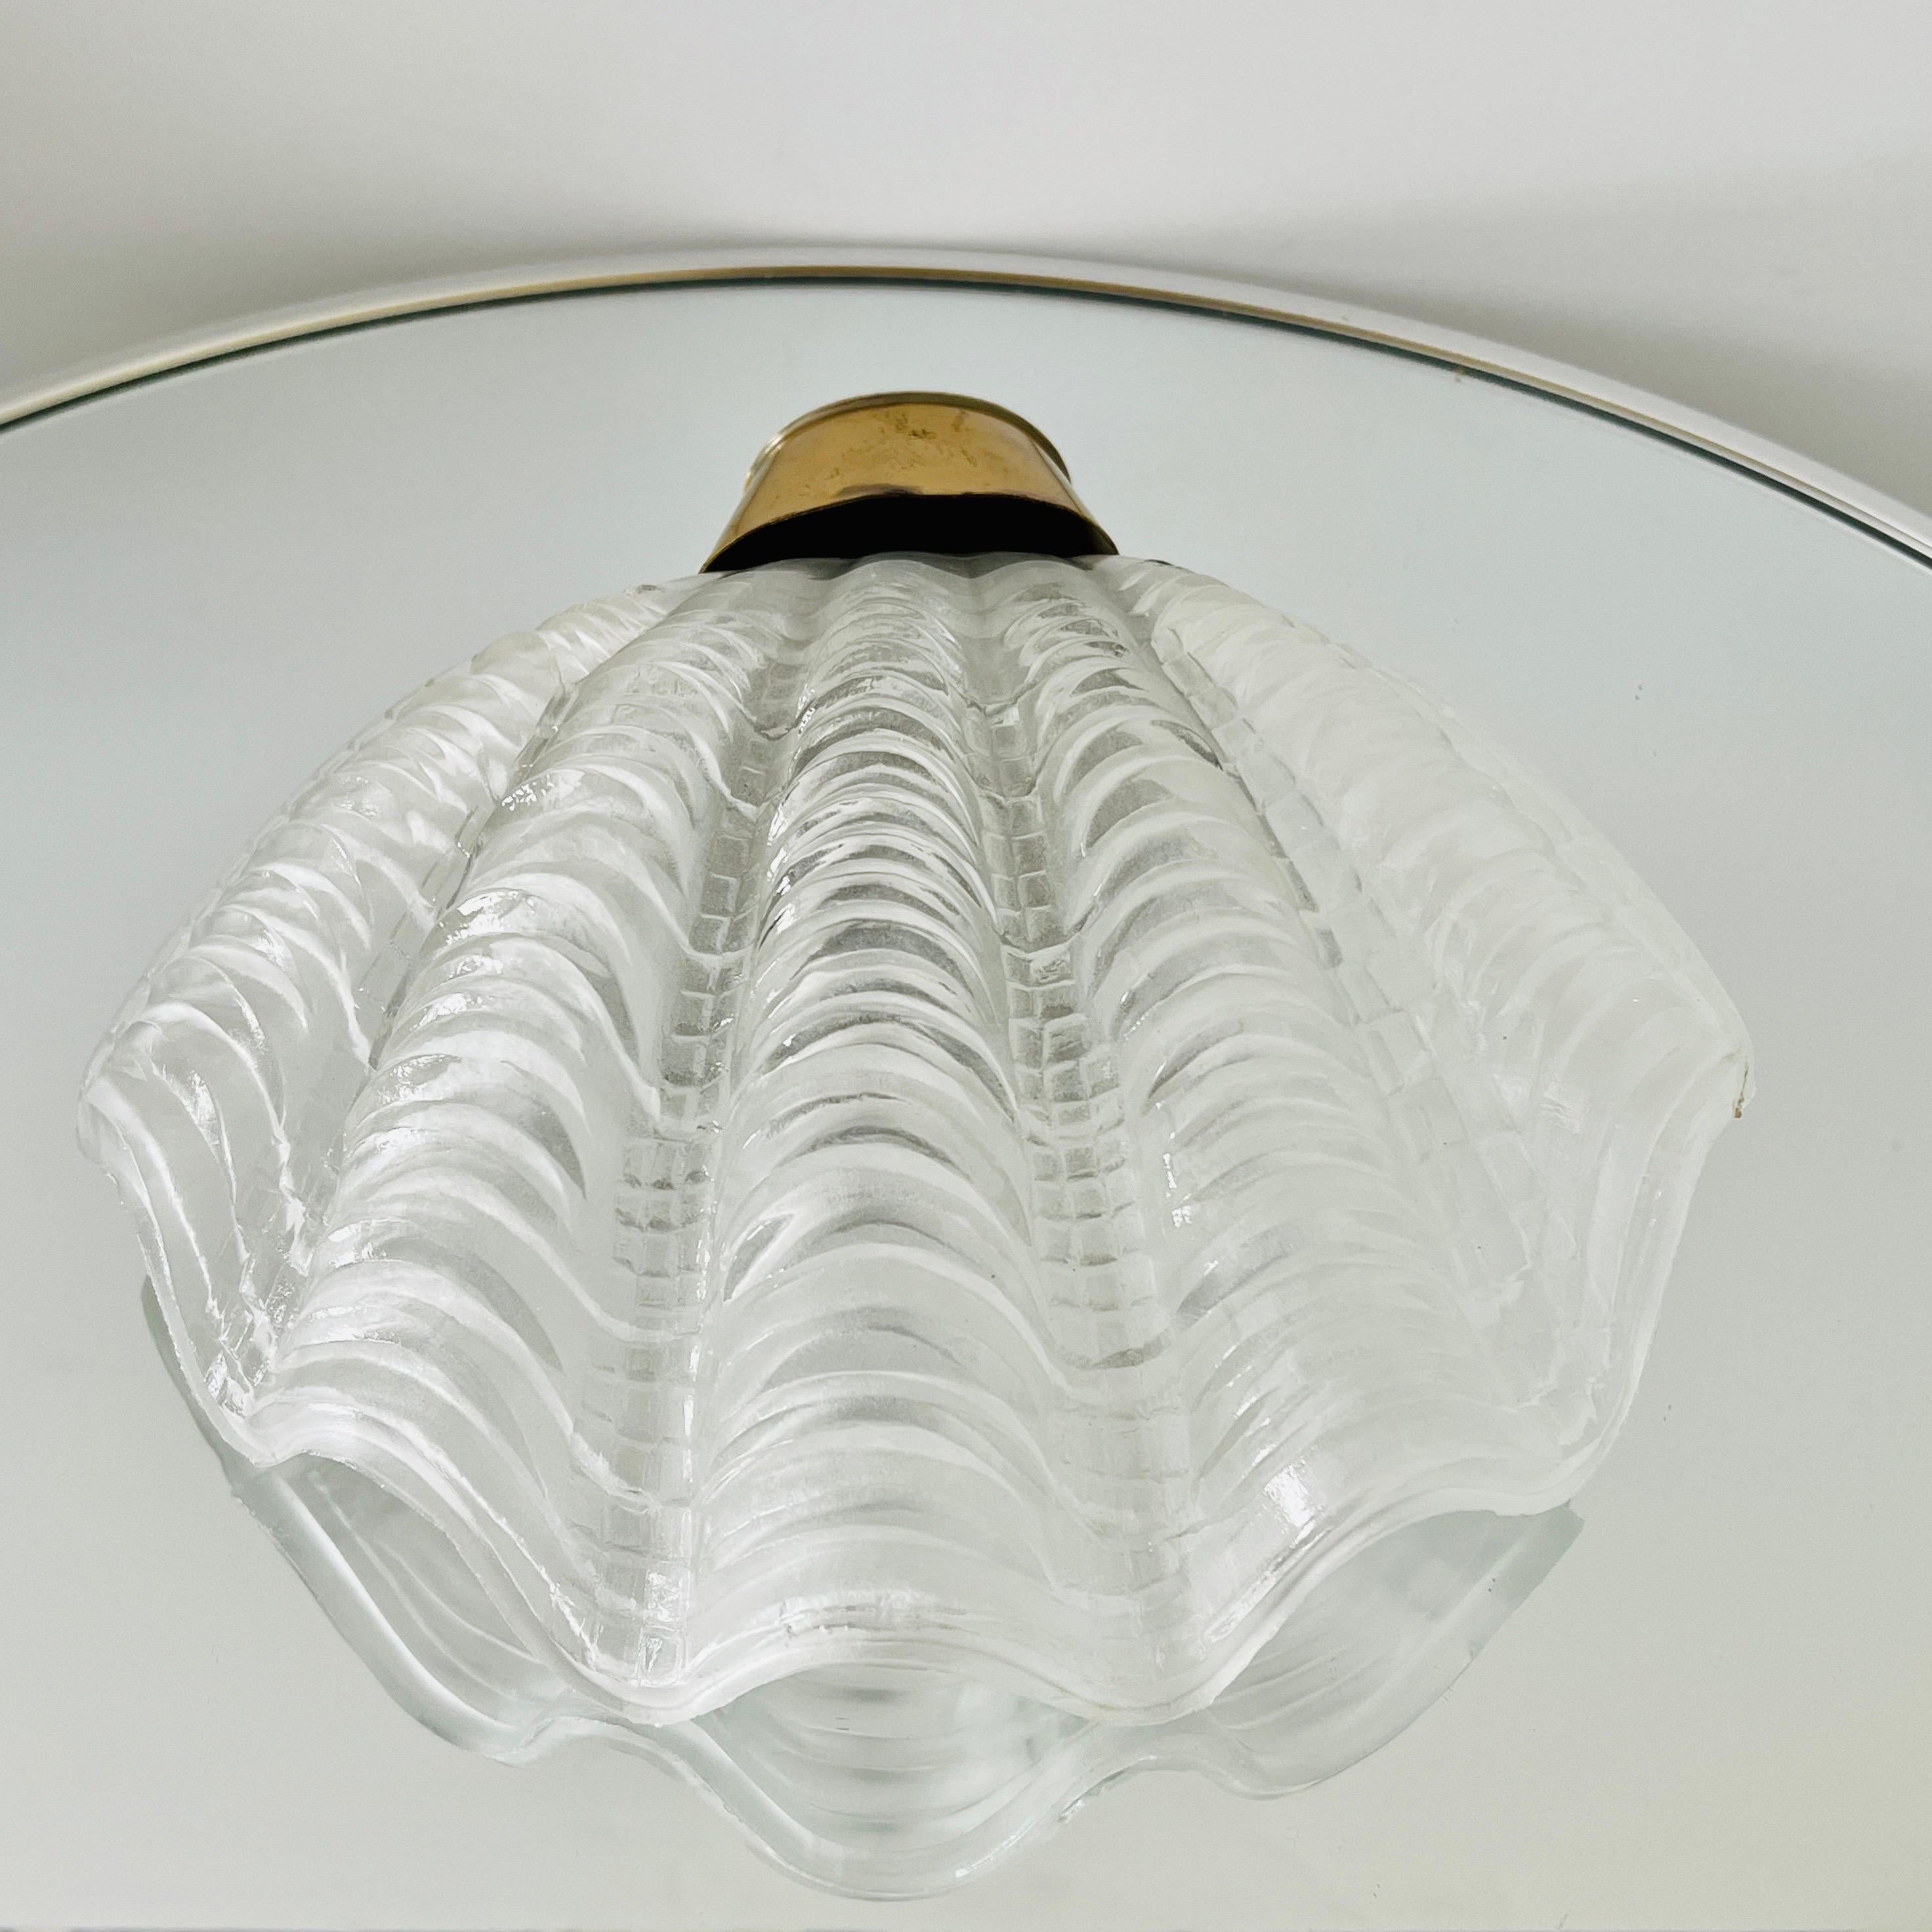 Art Deco Sconce with Elegant Shell Design, England, c. 1930's In Fair Condition For Sale In Fort Lauderdale, FL